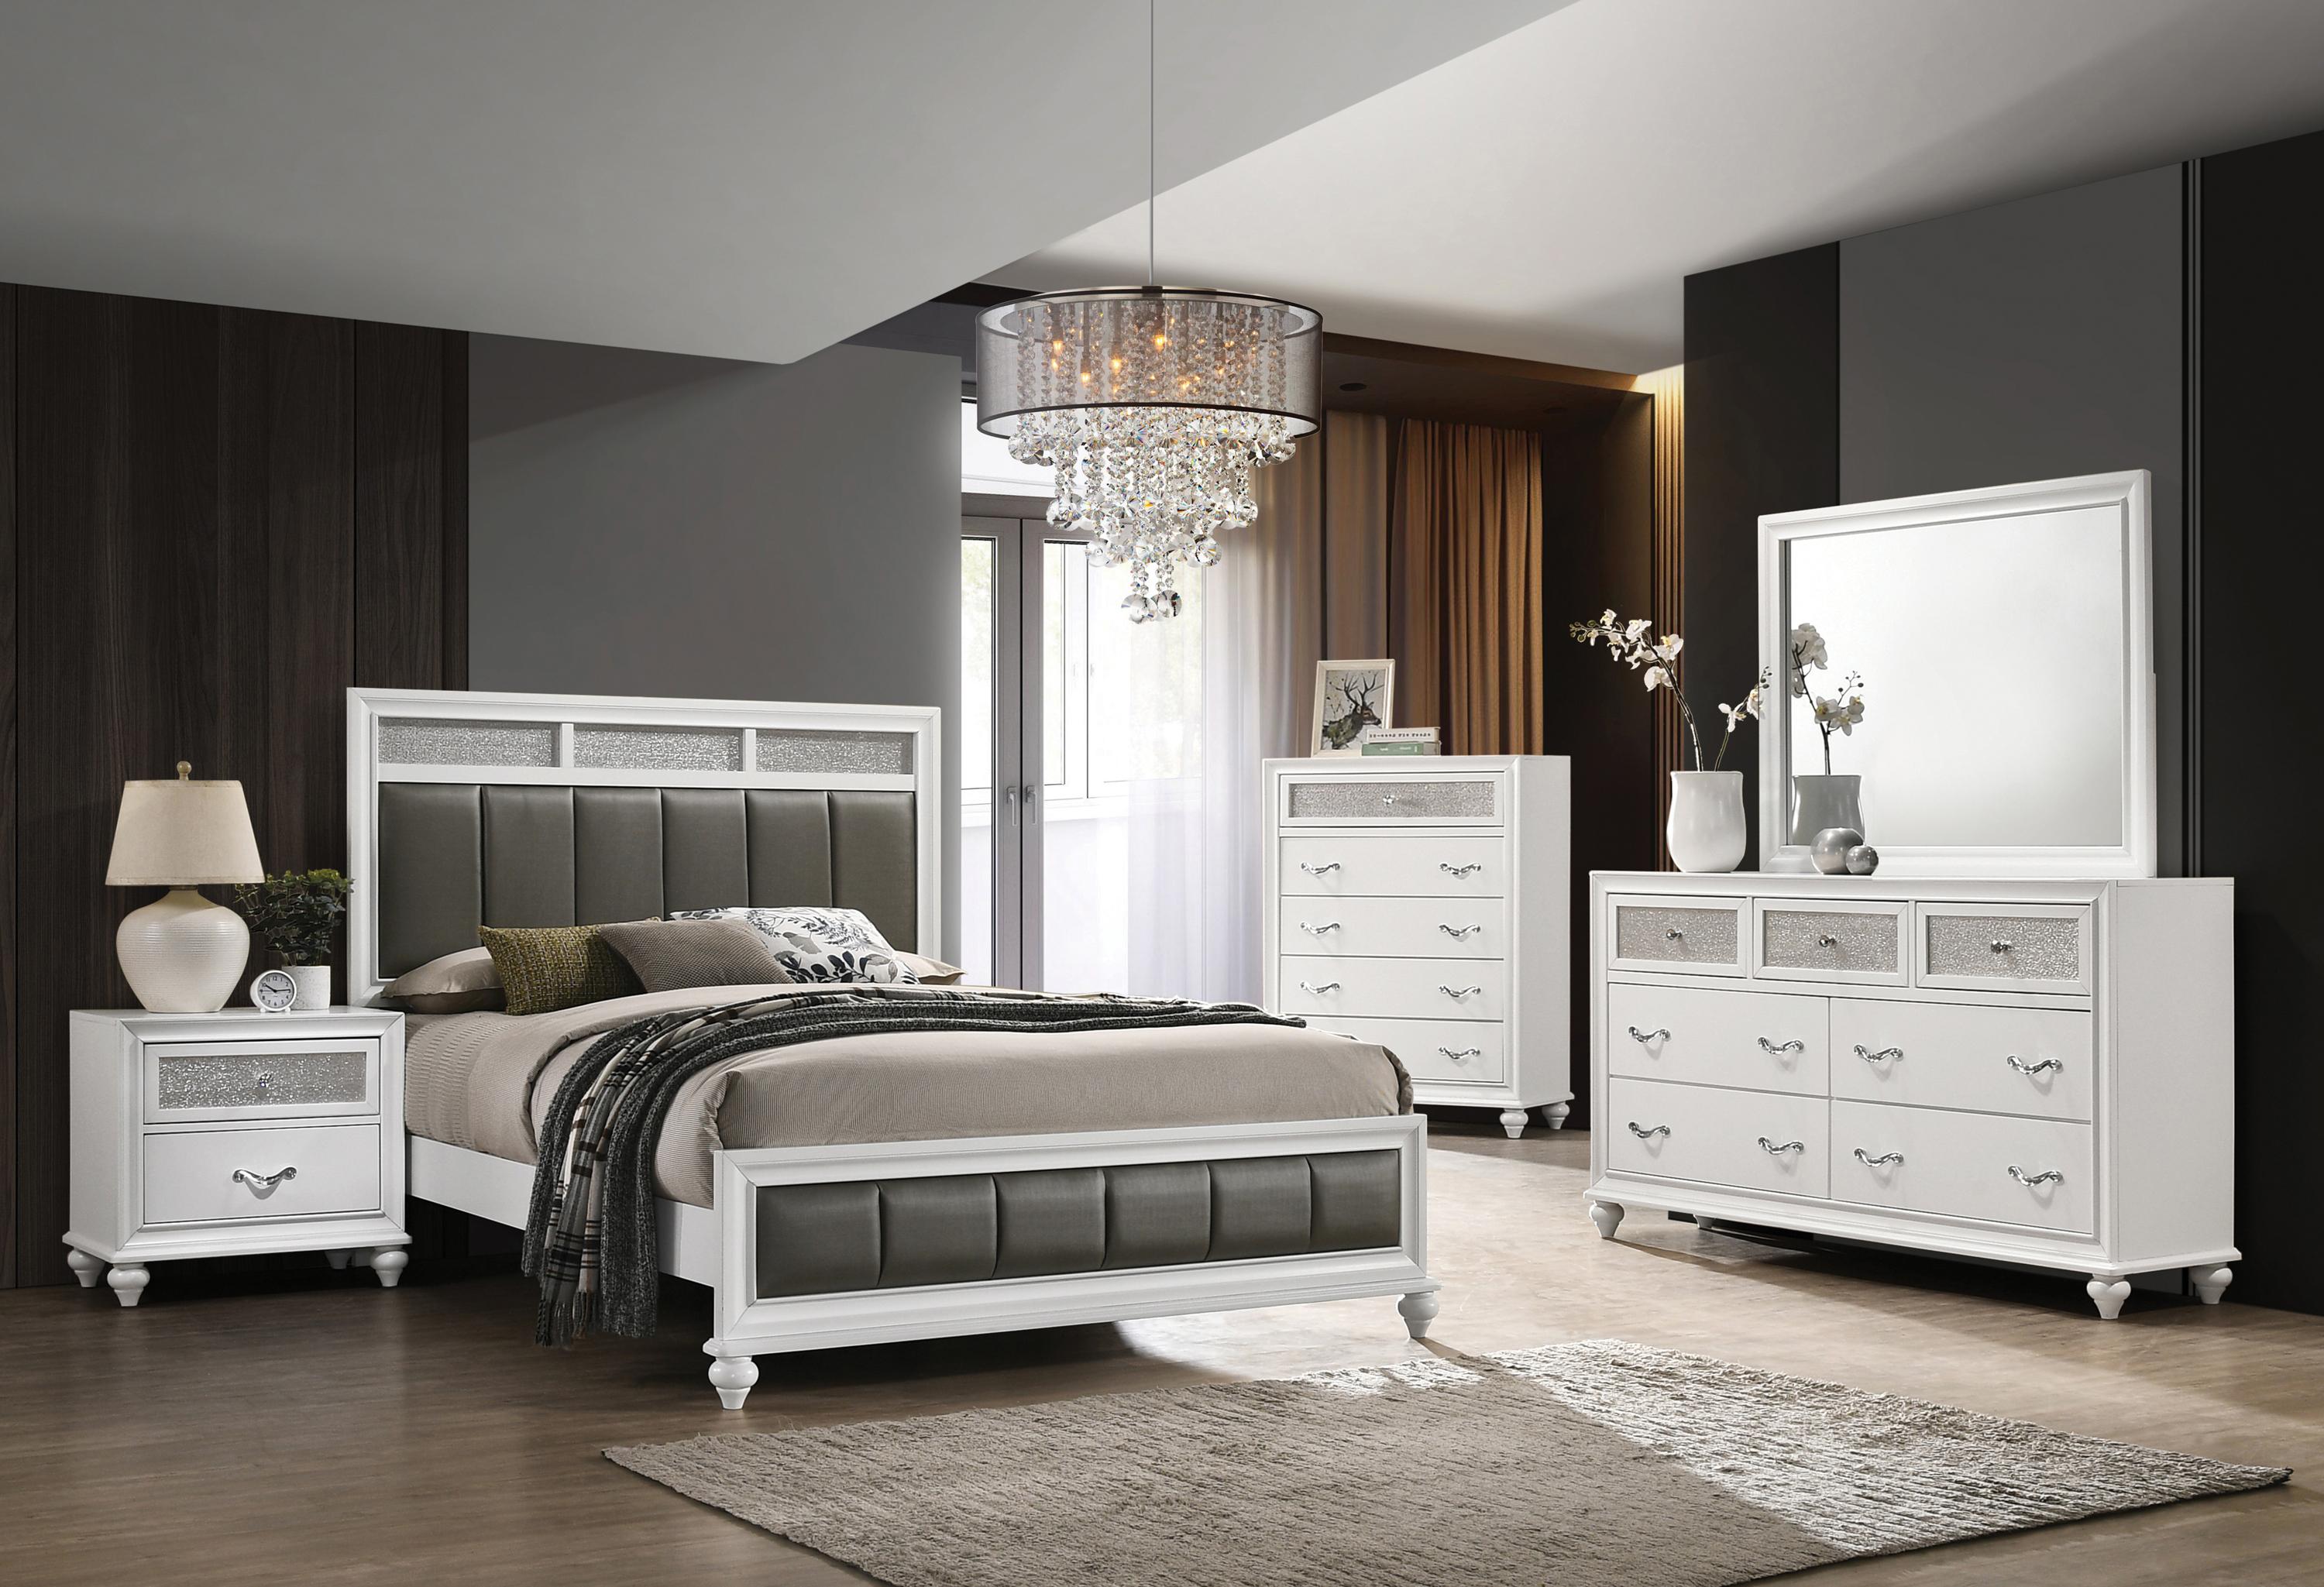 Modern Bedroom Set 205891KW-5PC Barzini 205891KW-5PC in White Leatherette